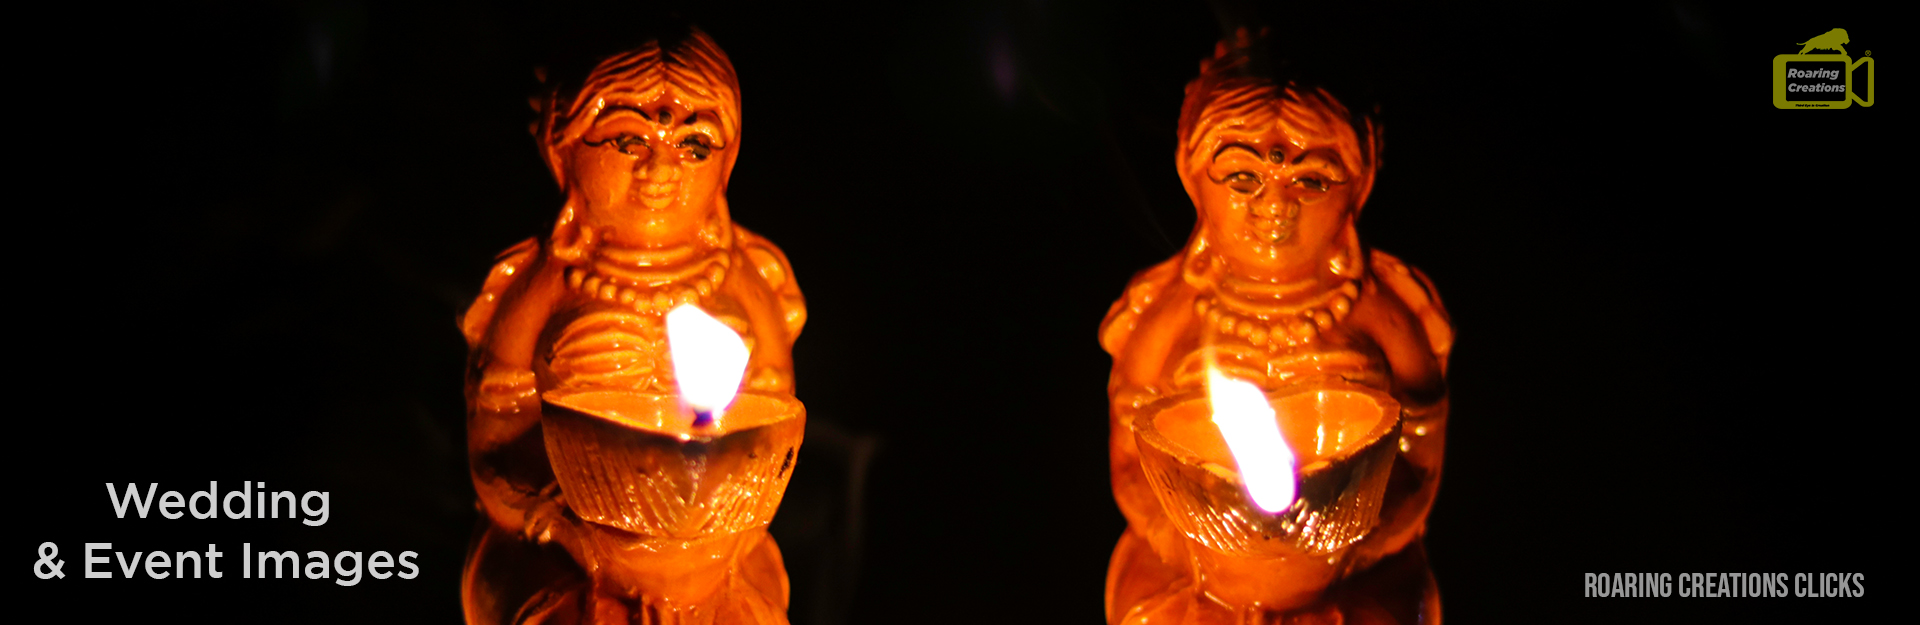 Special Moments of Special Events, lamp images,lamp women, diwali doll, dolls, 